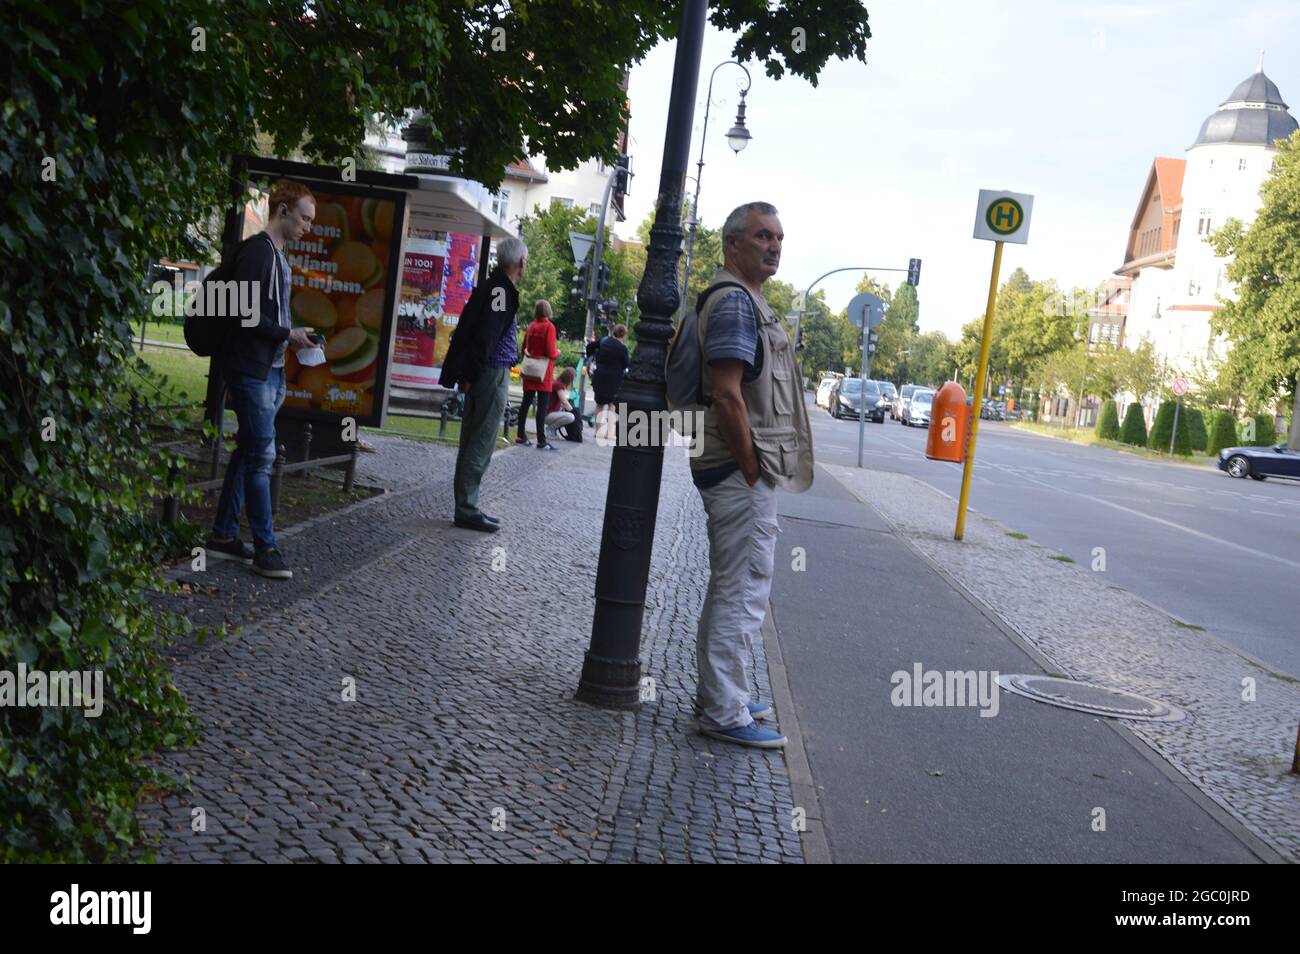 Waiting for the bus at bus stop in the evening at Lindenthaler Allee, Mexikoplatz, in Zehlendorf, Berlin, Germany - August 4, 2021. Stock Photo